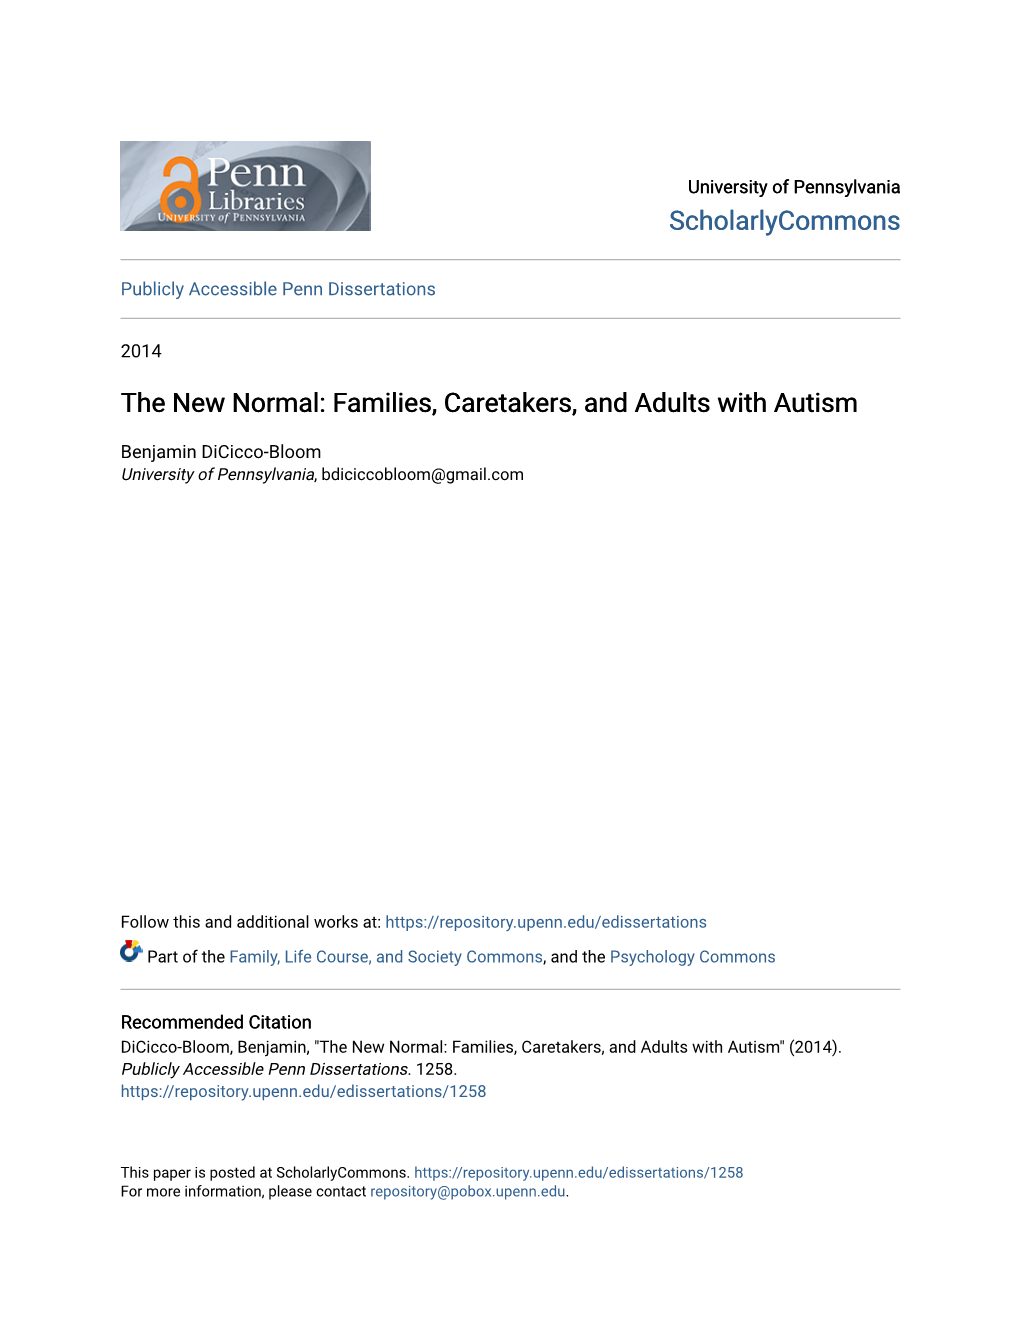 The New Normal: Families, Caretakers, and Adults with Autism